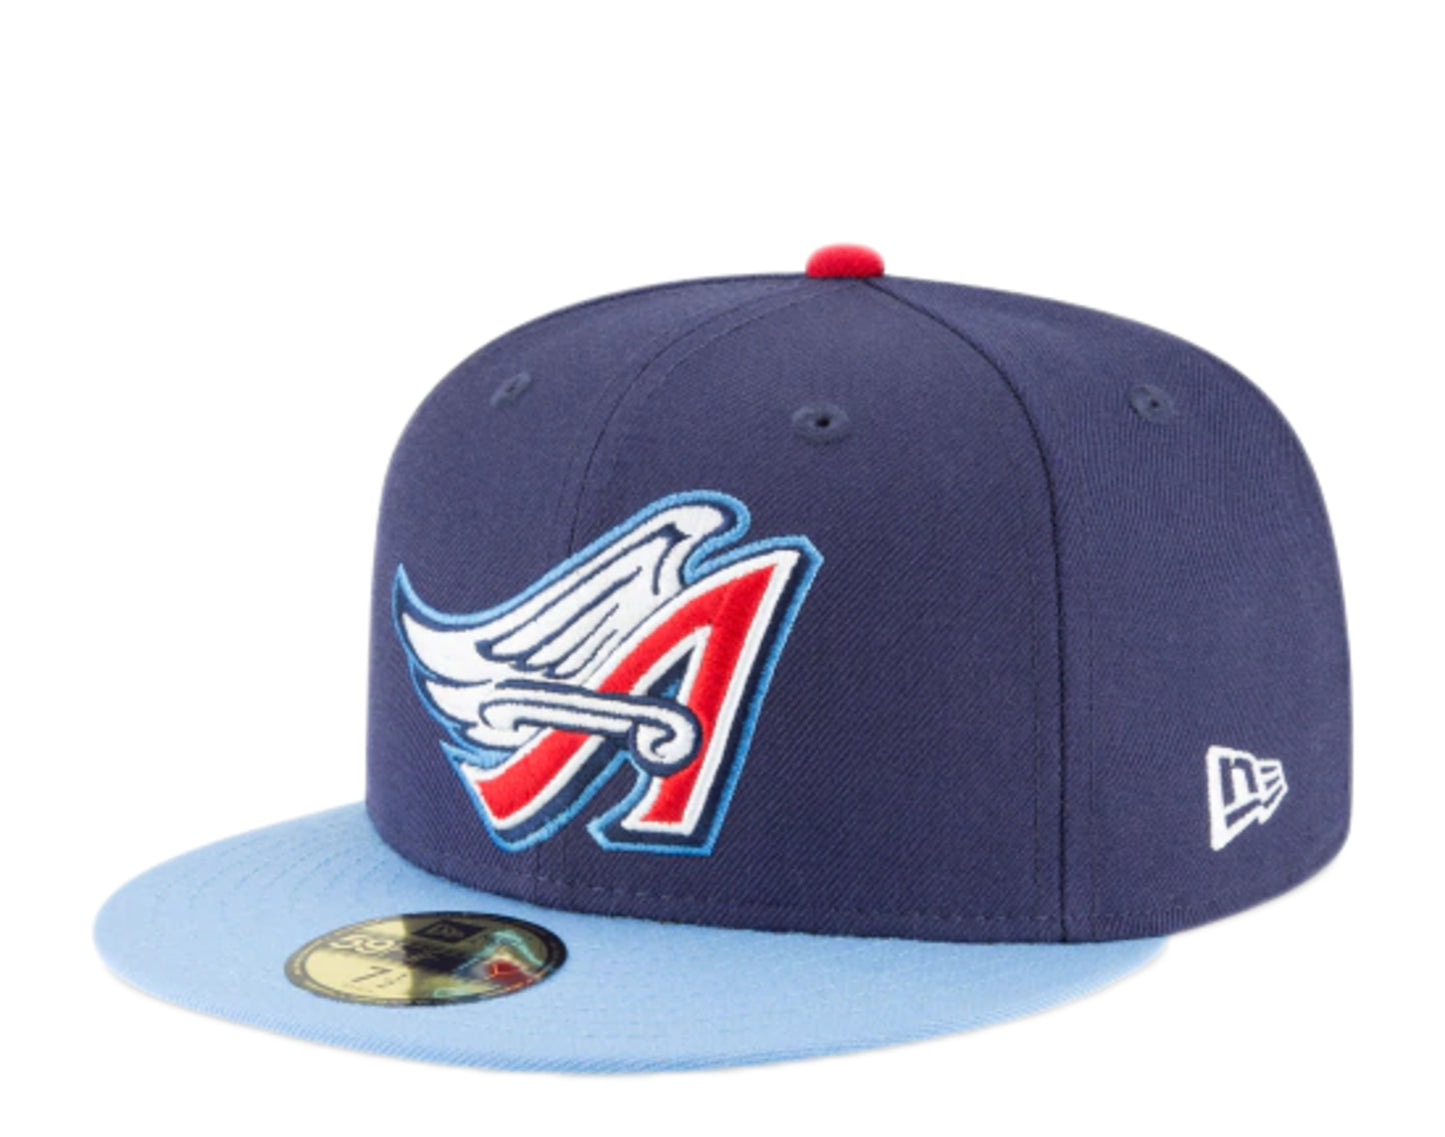 New Era 59Fifty MLB Anaheim Angels 1997 Cooperstown Fitted Hat